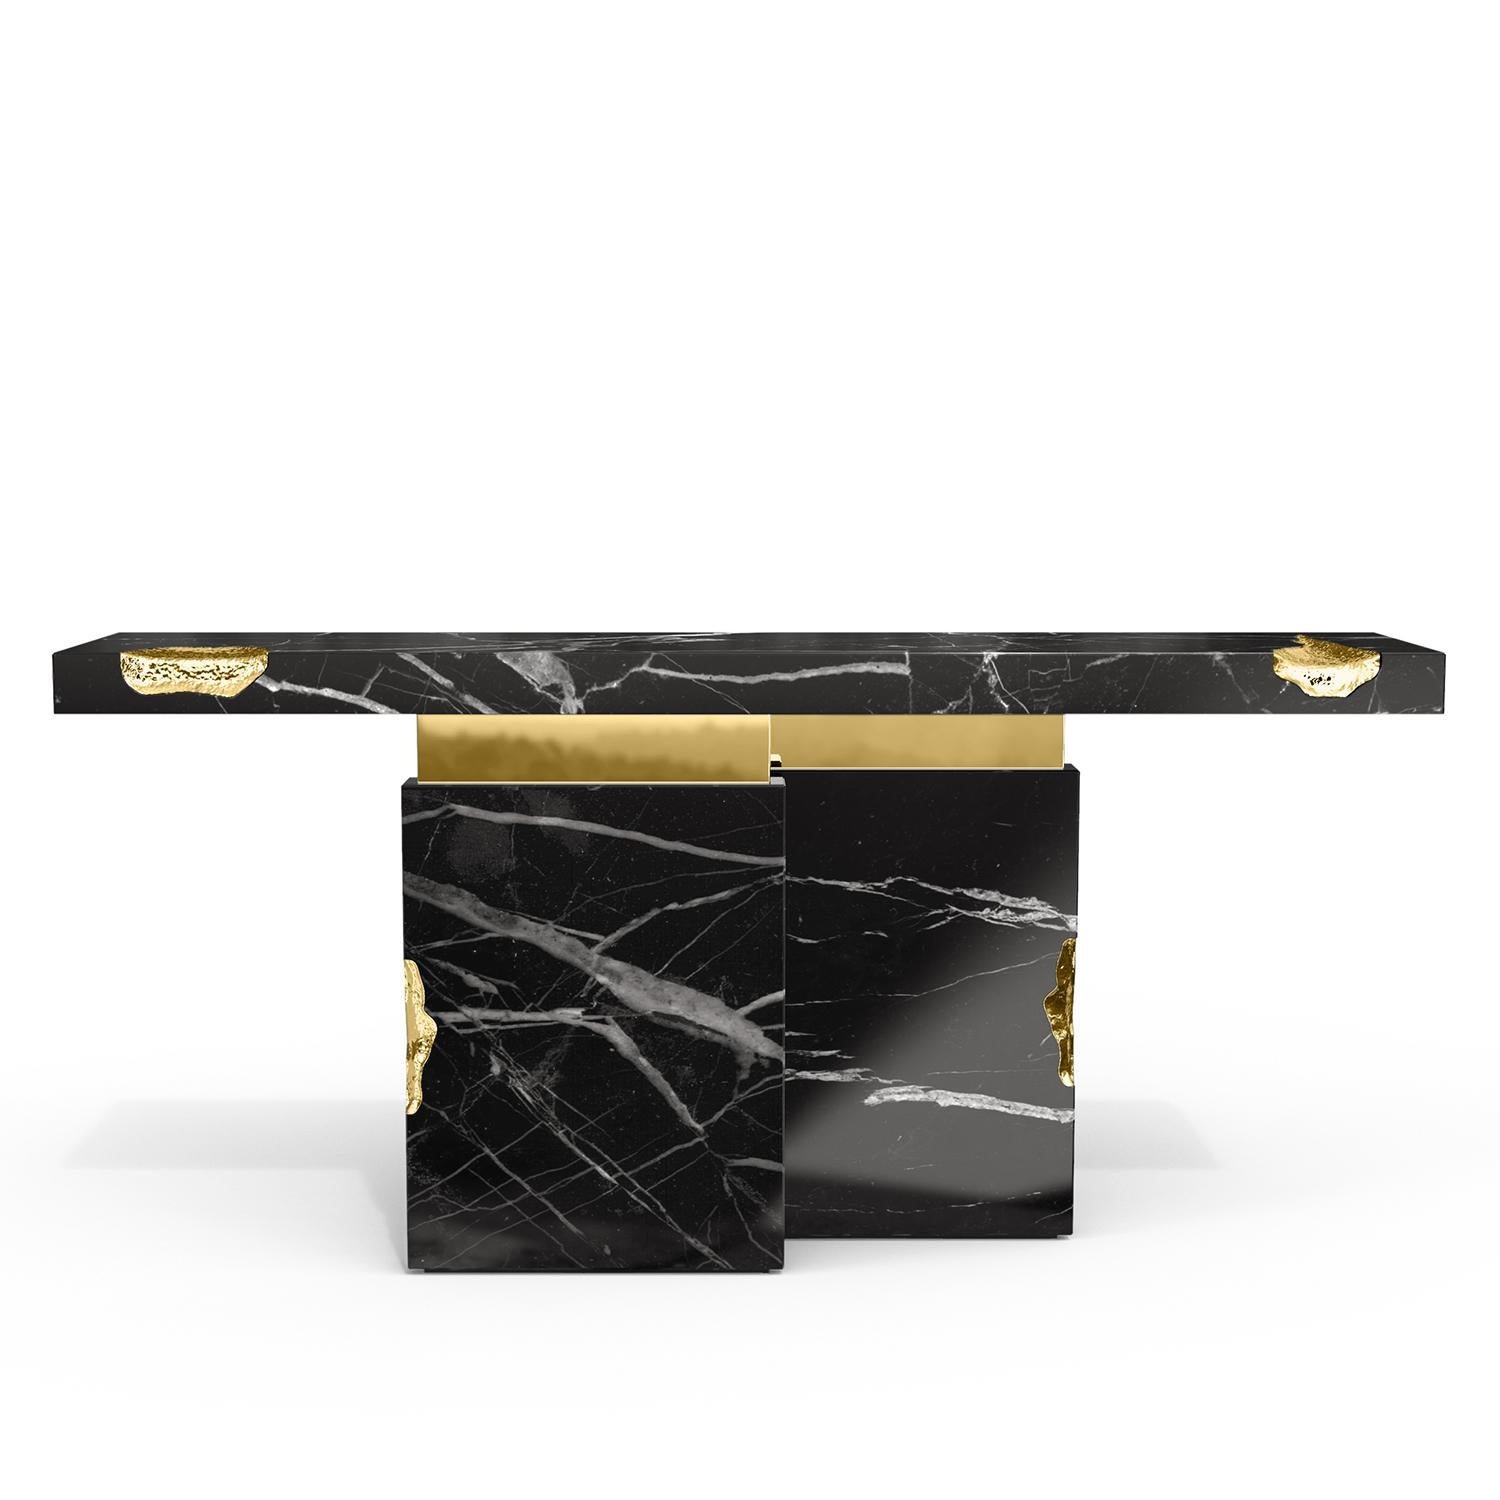 Console table Majestic Black with black marquina
marble, carved and polished. With solid polished brass
and with hammered solid brass.